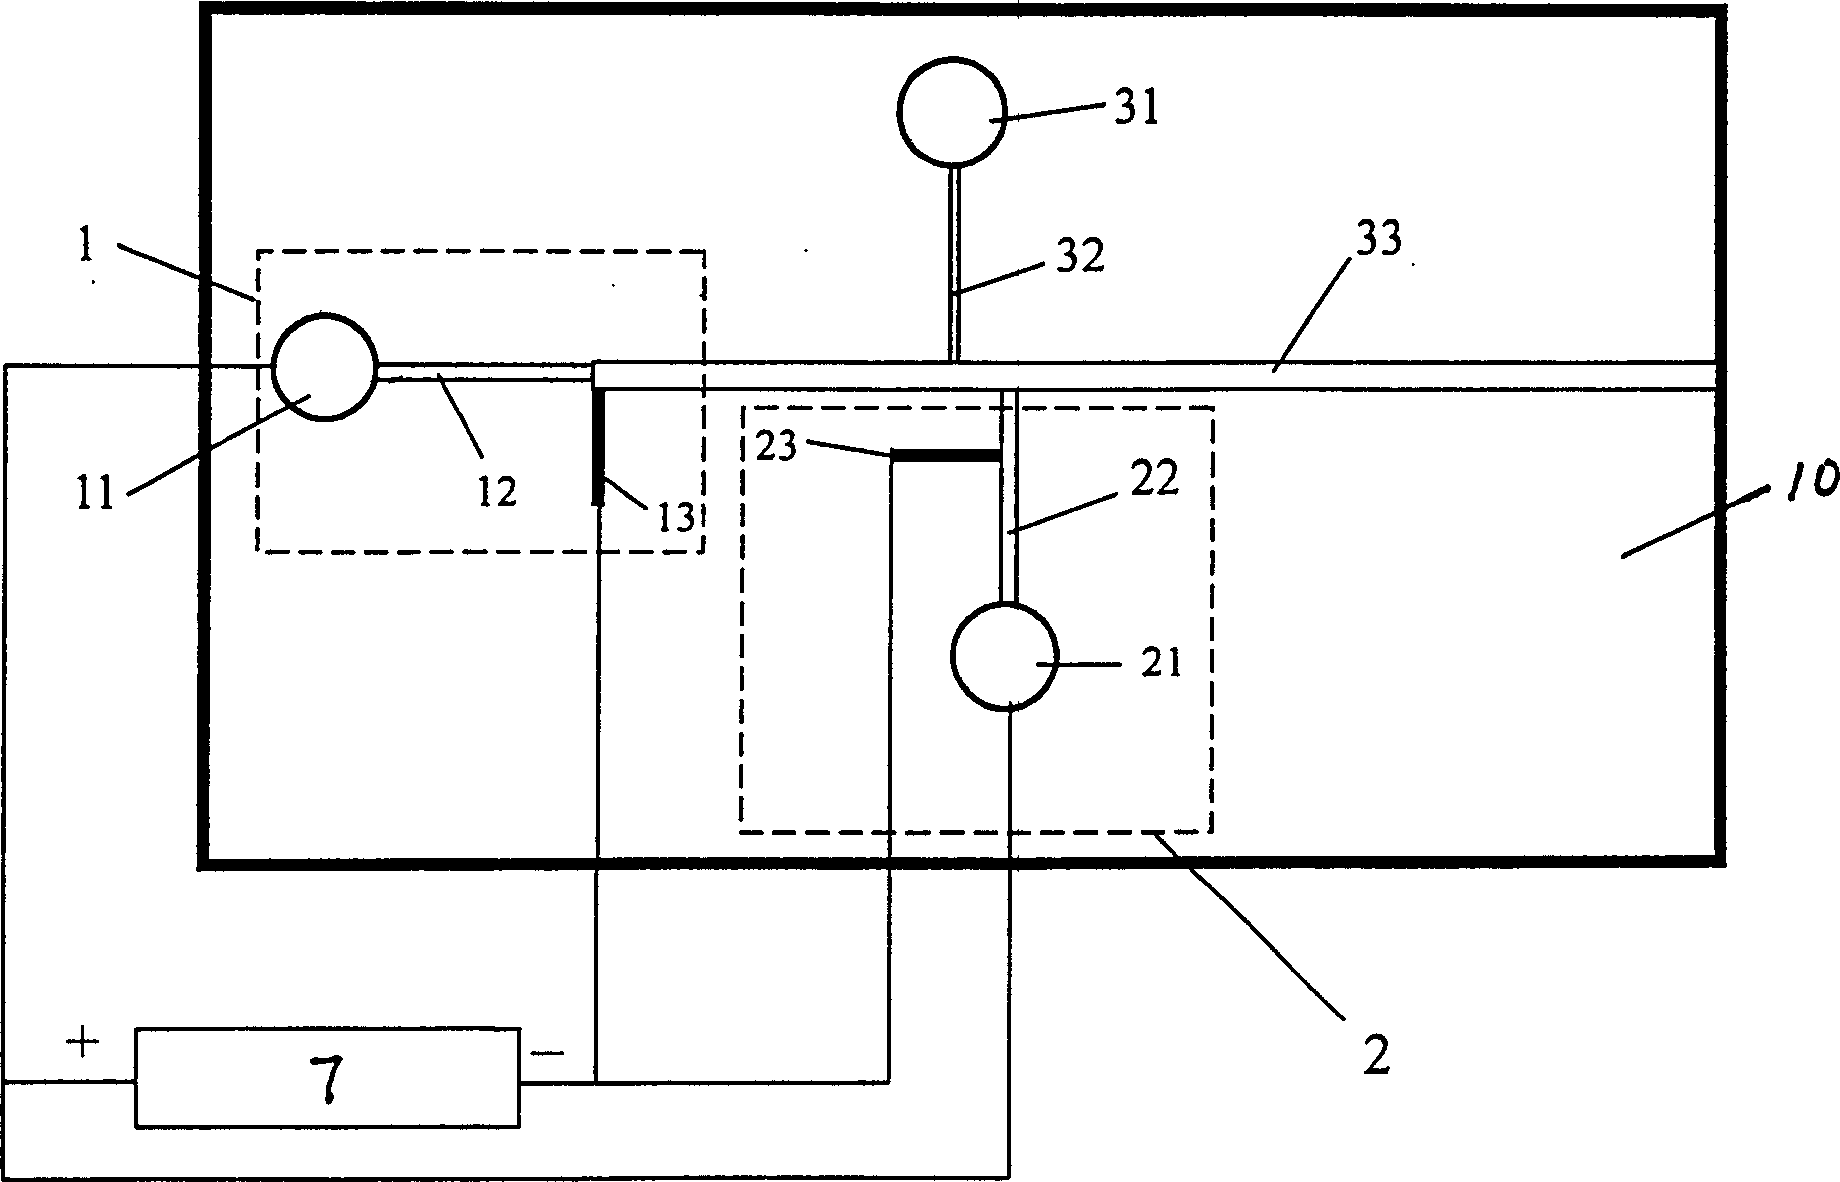 Simple two-step isoelectric focusing separation analytic device